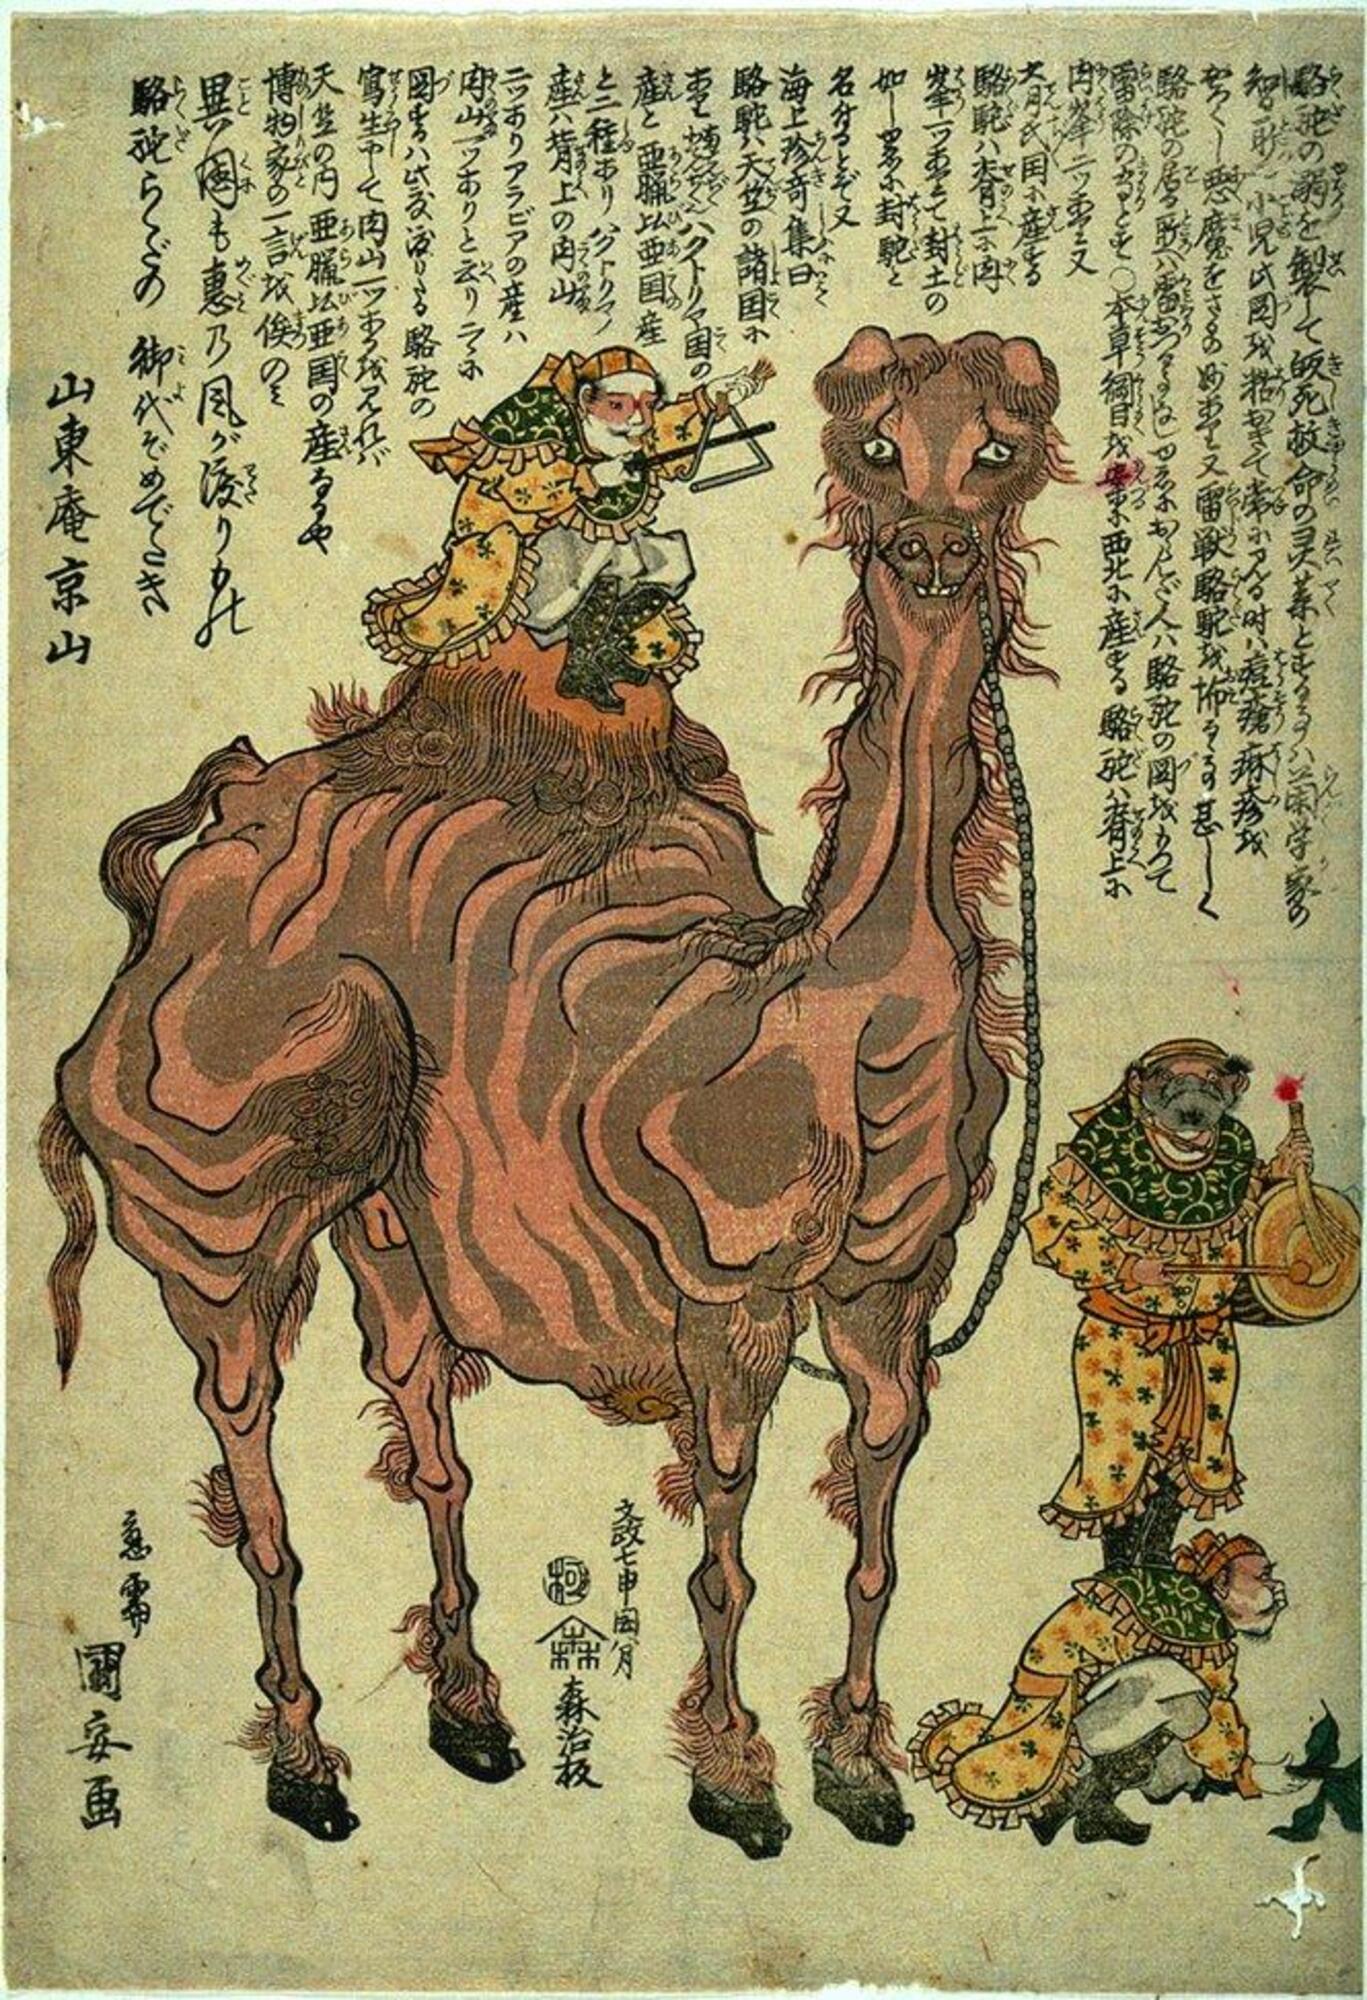 This double-leaf print depicts two camels and accompanying foreign trainers or performers in fringed clothing, with ballooning pants and dark boots.  Some of the performers play instruments, while others tend to the camels.  Above both pages is writing by calligrapher Santô Kyôden describing the camels and their tour of Japan around 1821.